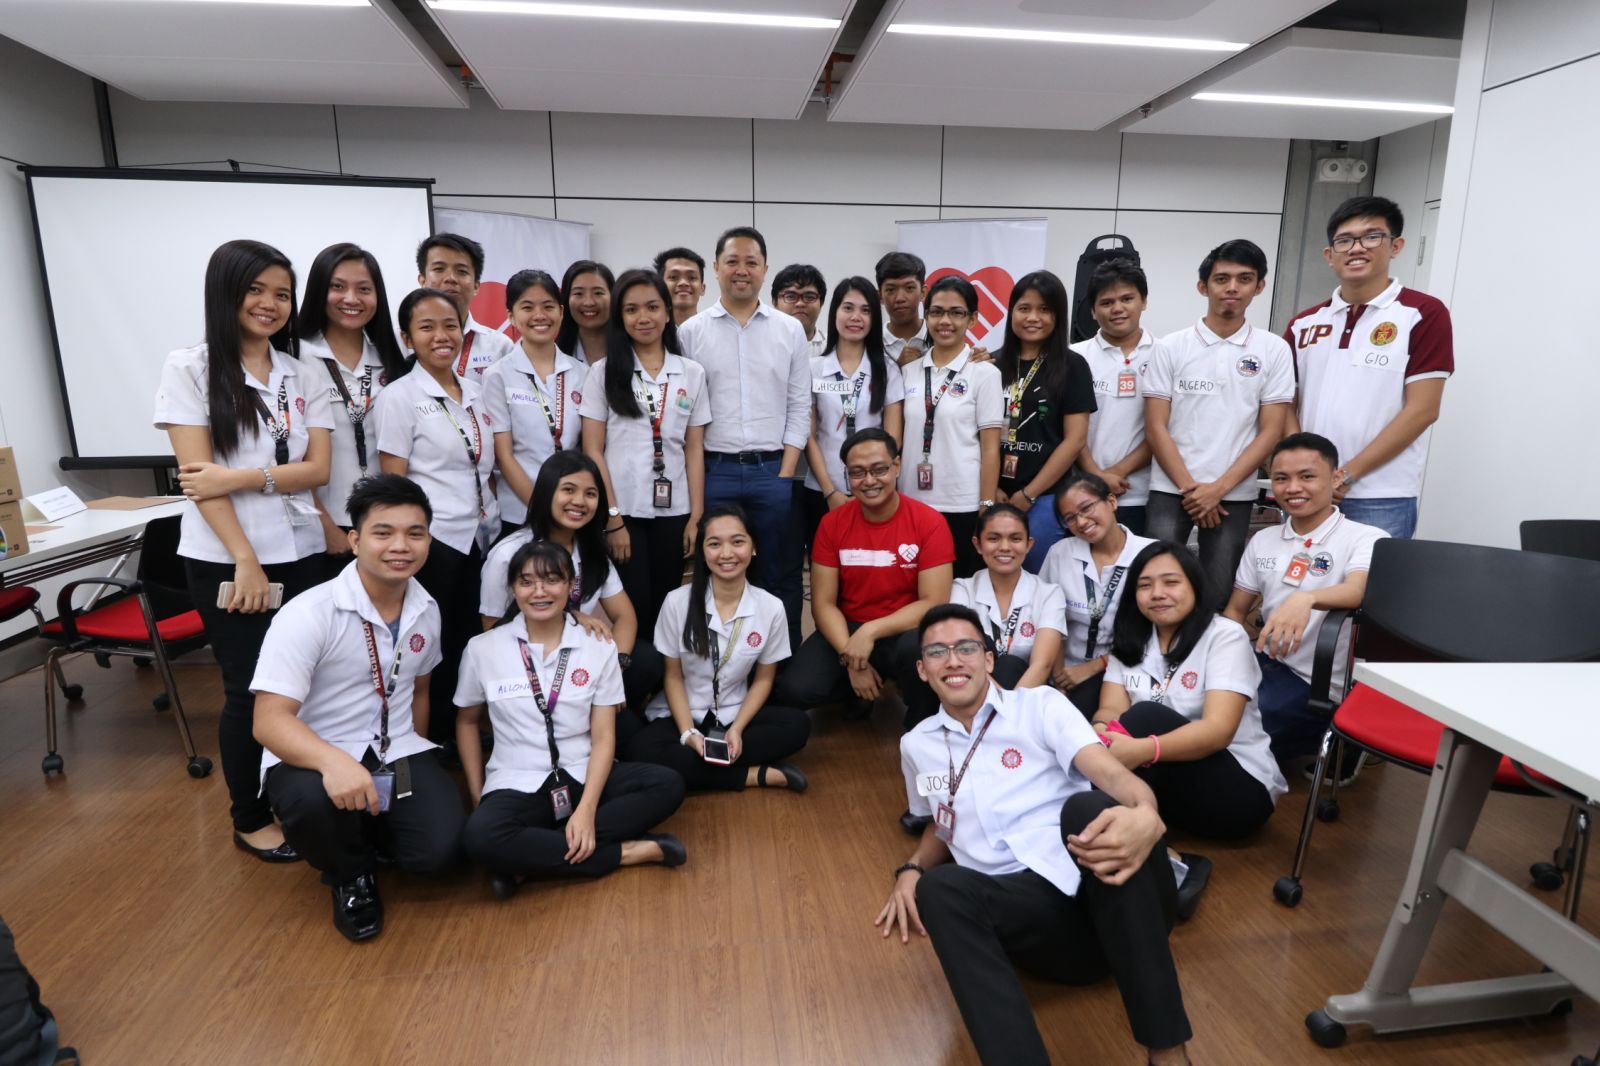 Megawide Foundation scholars attend the MEES Program Orientation with Megawide Foundation Chairman Louie Ferrer.